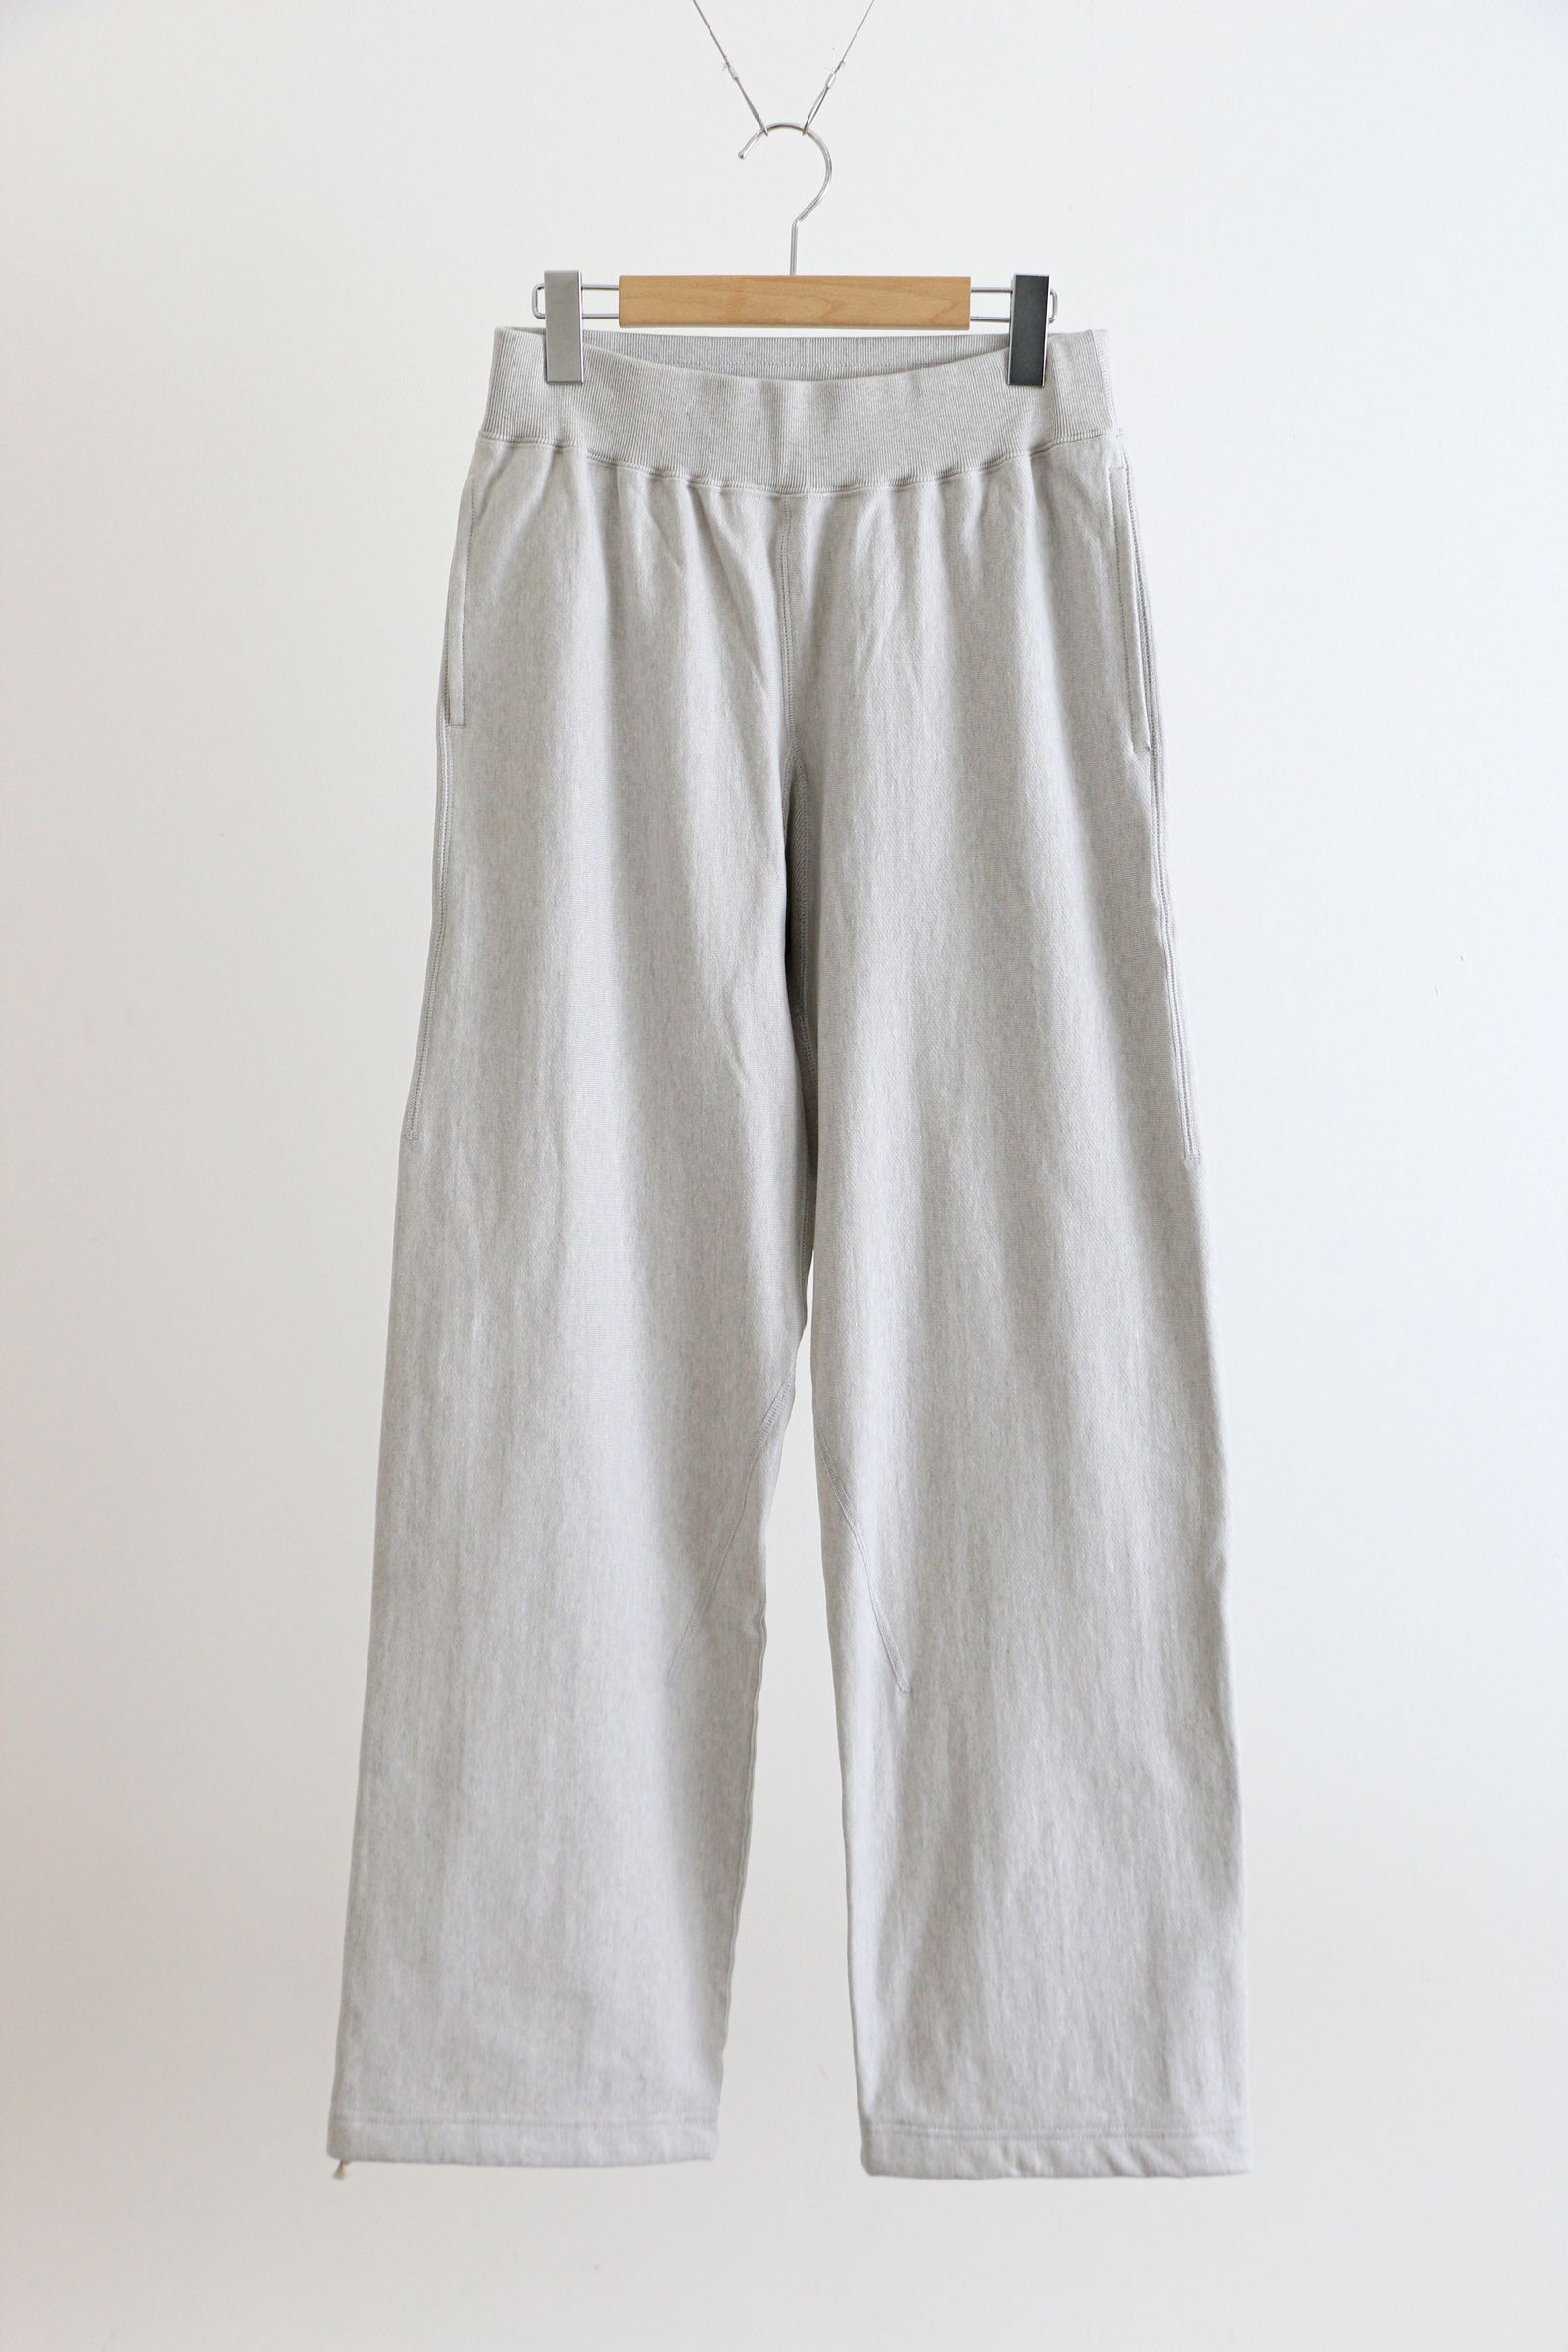 ULTERIOR - FADED SILKY TERRY RW SWEAT PANTS HEATHER GINGER